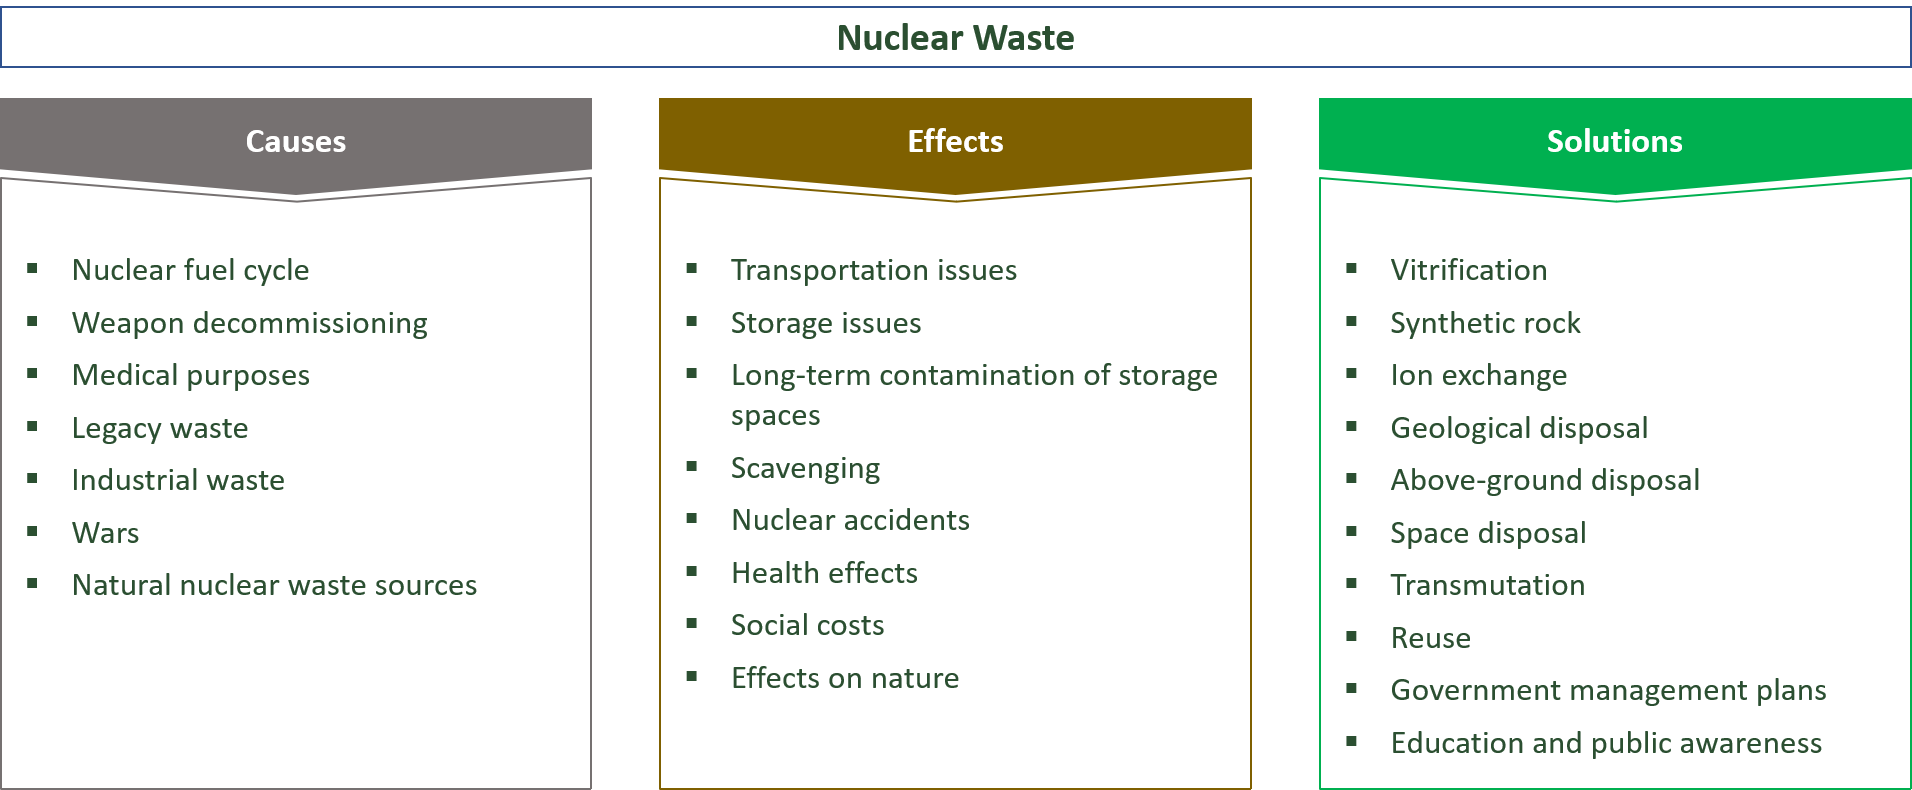 causes, effects and solutions for nuclear waste polluting the environment